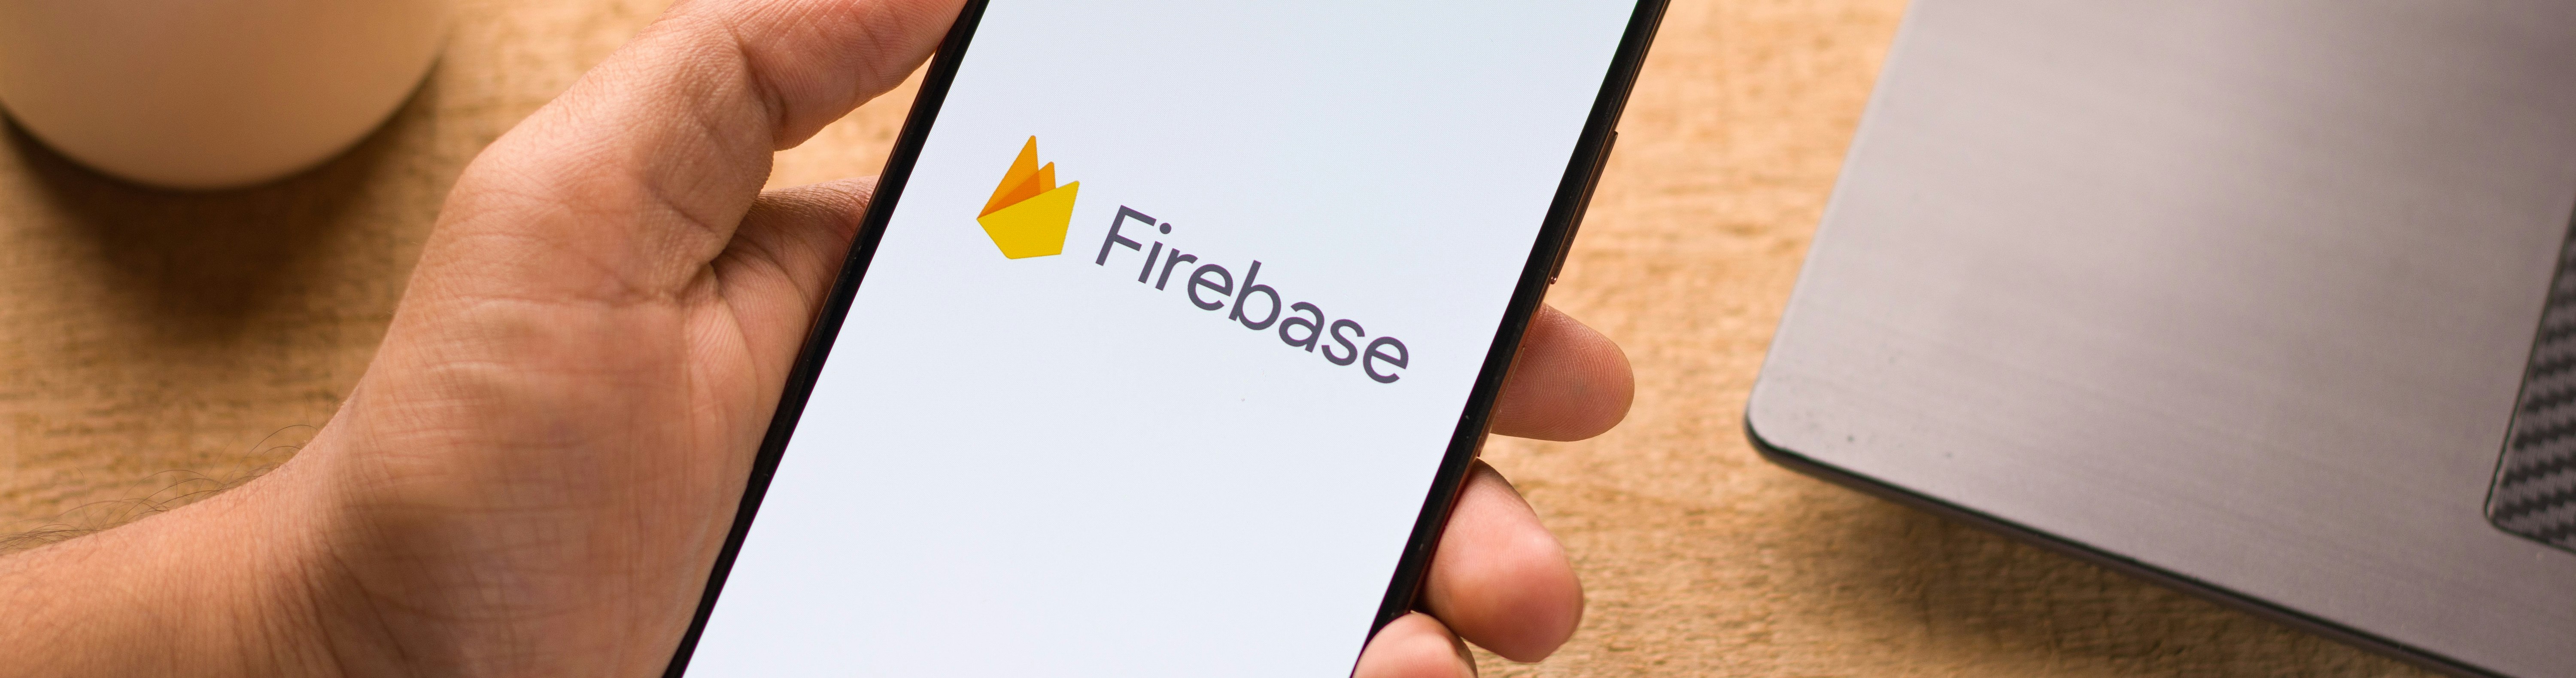 Man holding phone with Firebase logo with computer in the background